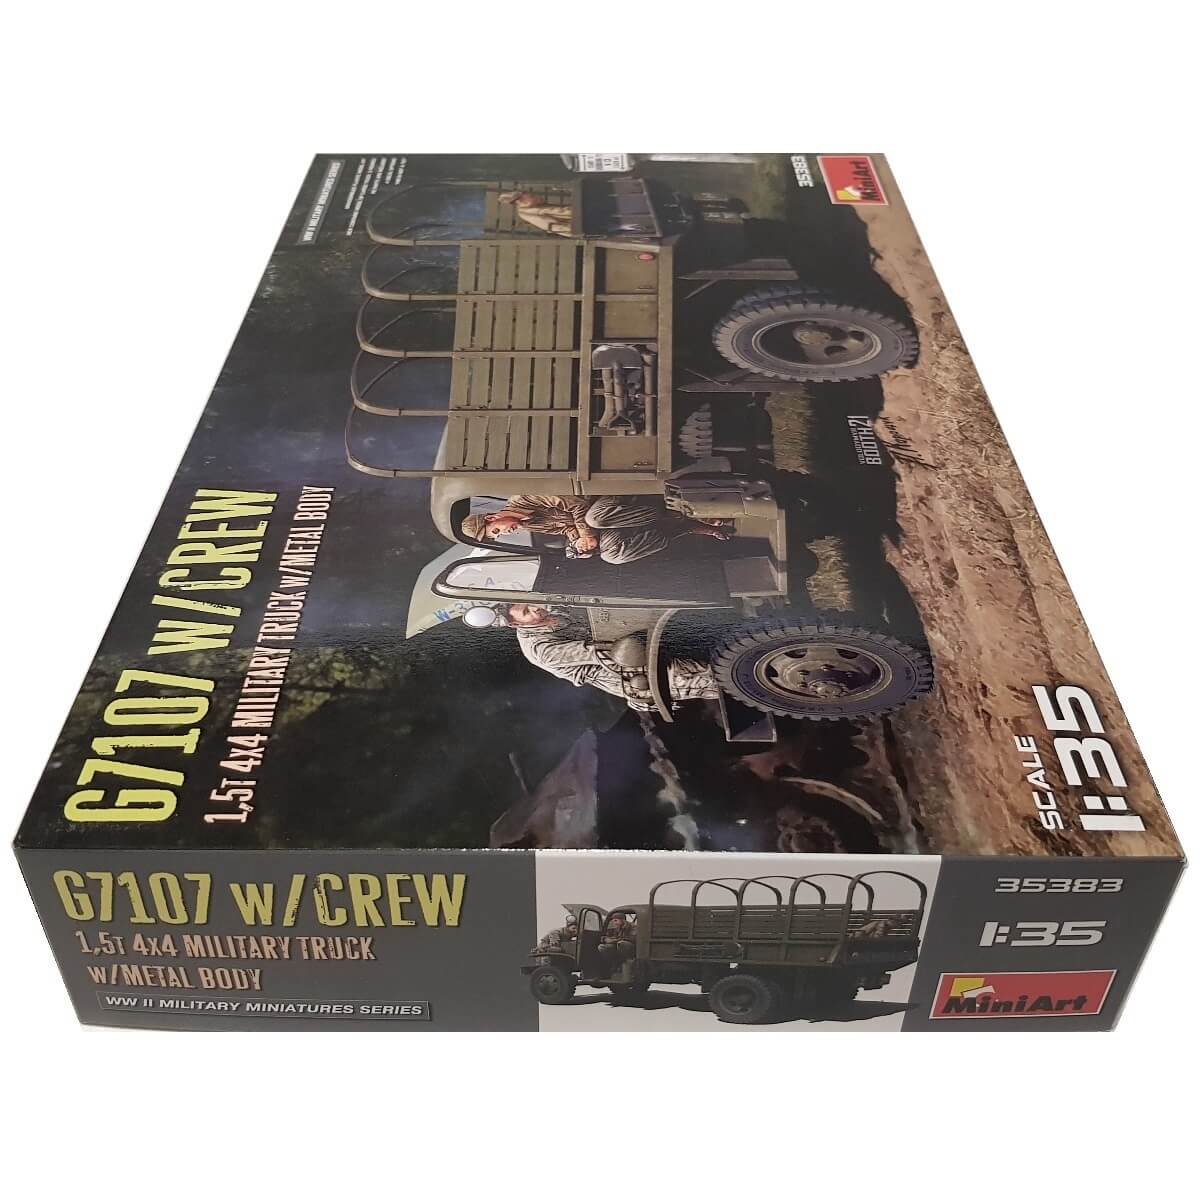 1:35 G7107 1½-ton 4x4 Cargo Truck with Metal Body and Crew - MINIART